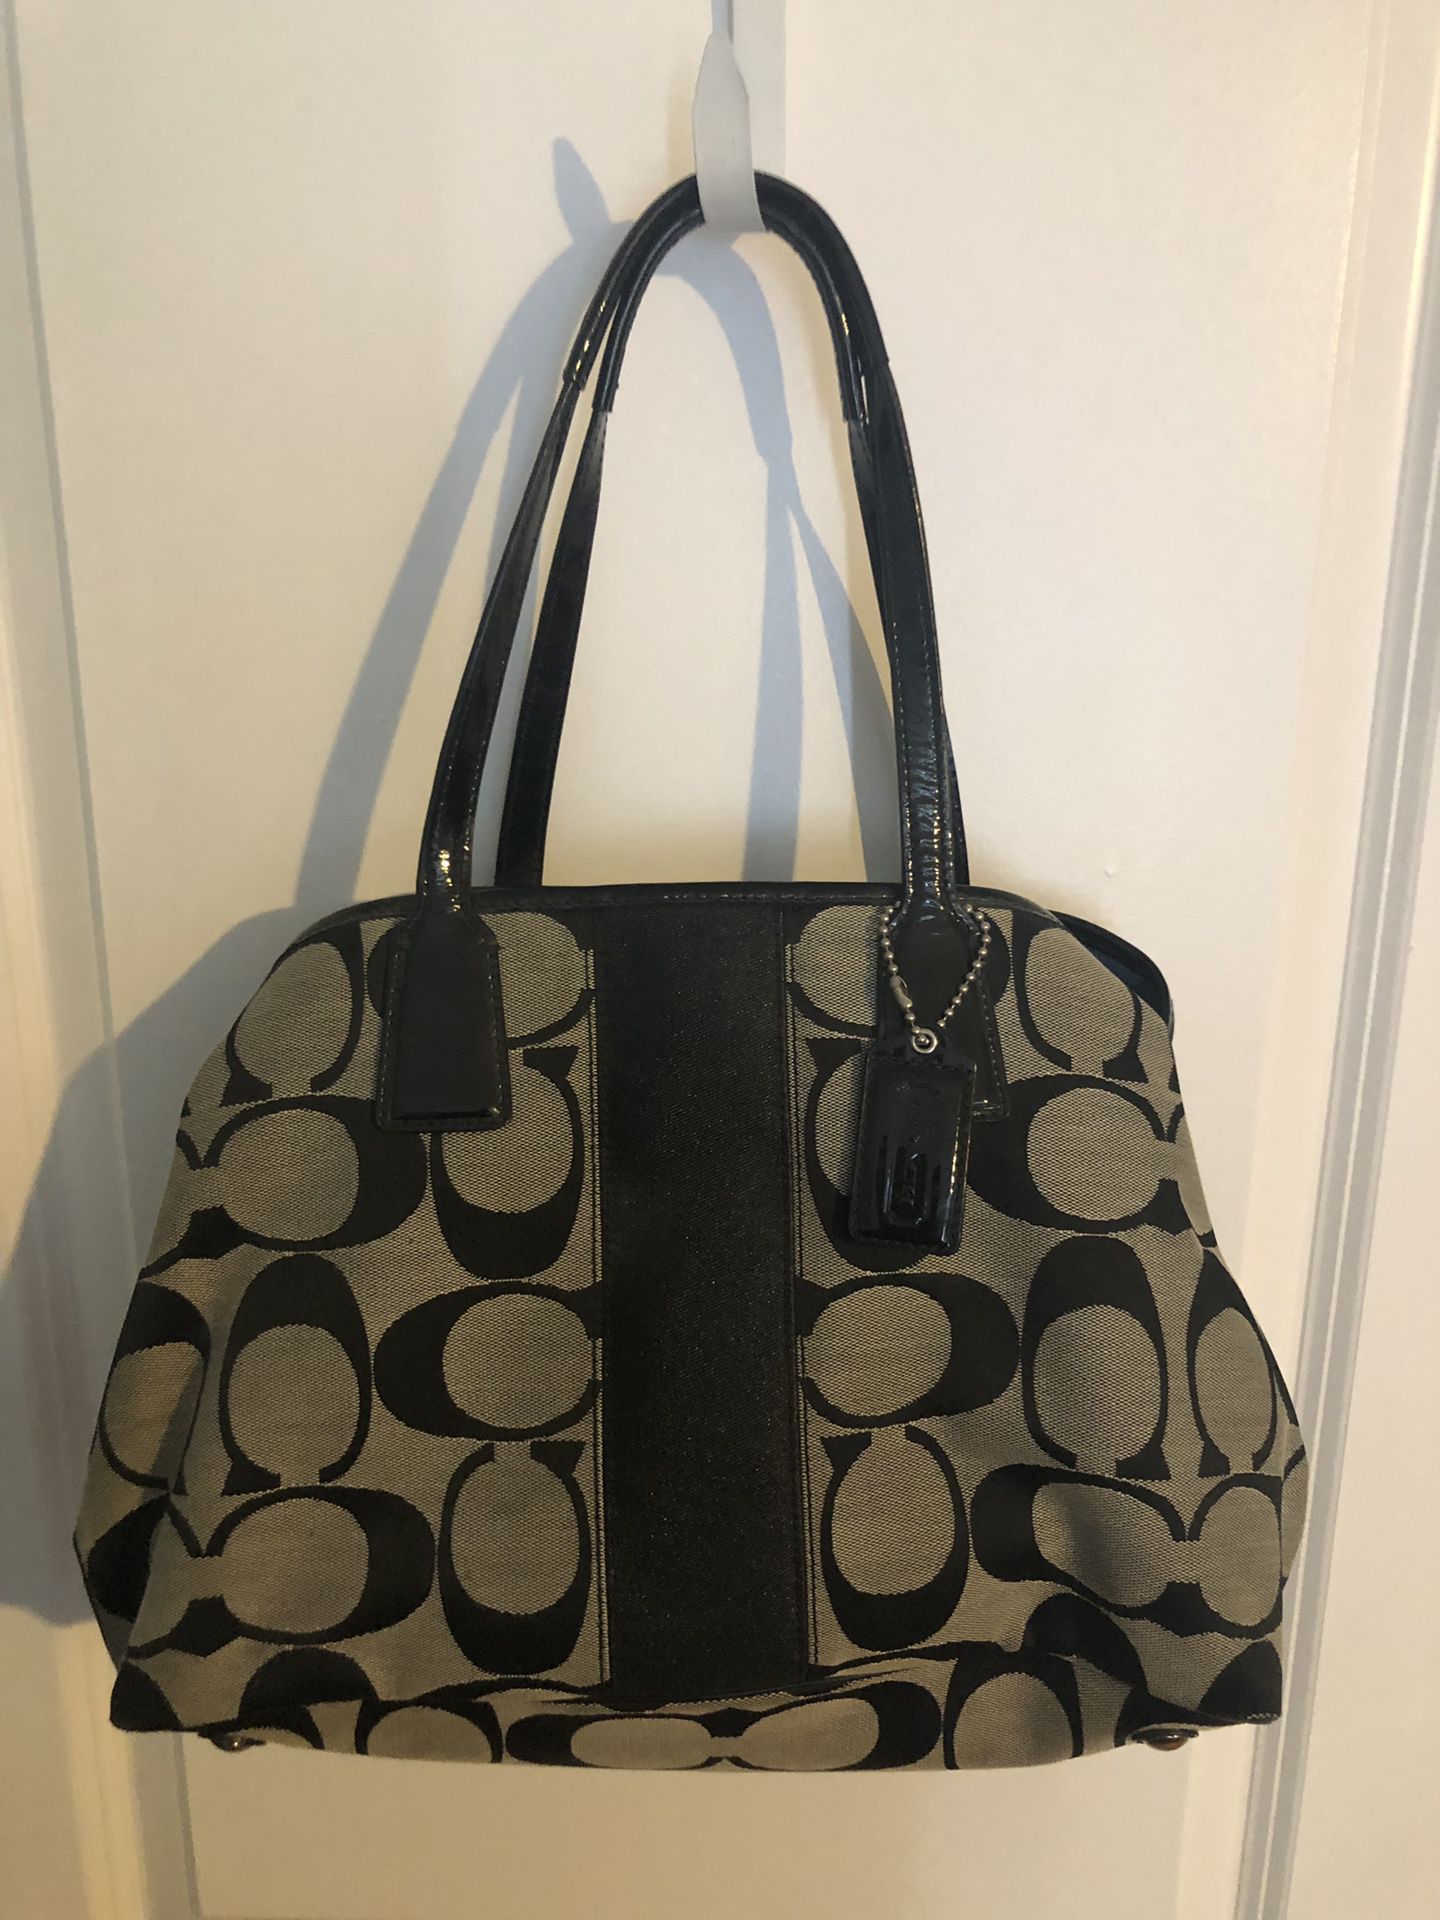 Black authentic Coach purse $45 like new and clean